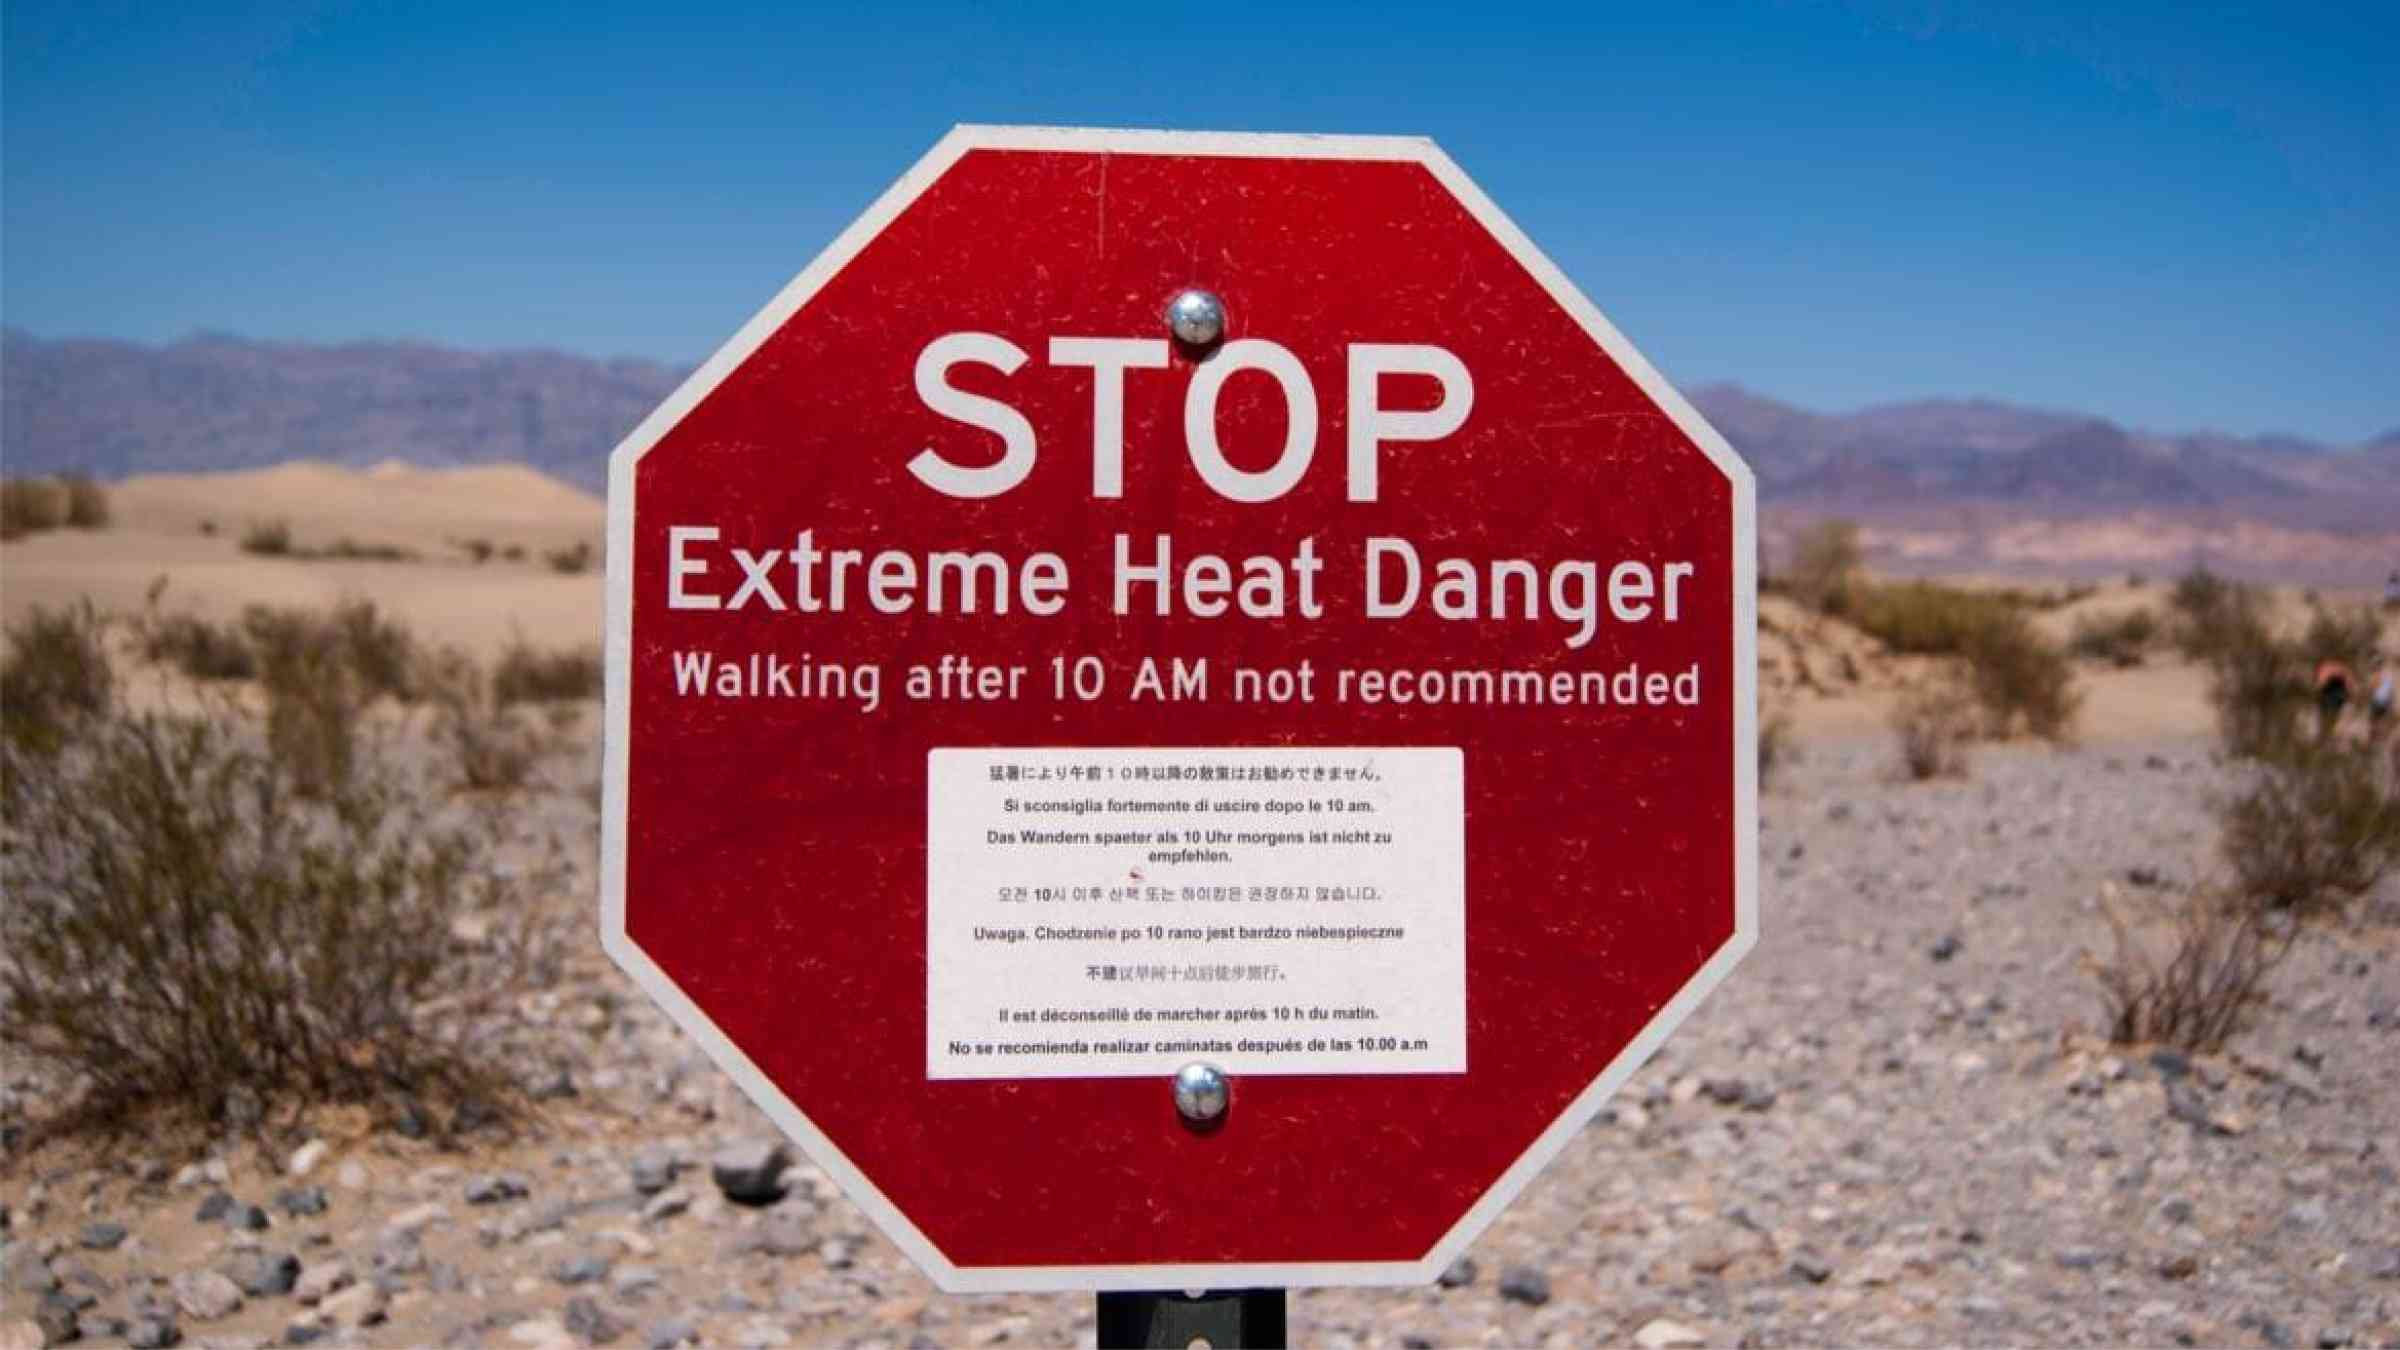 An extreme heat warning sign warns tourists in Death Valley, California